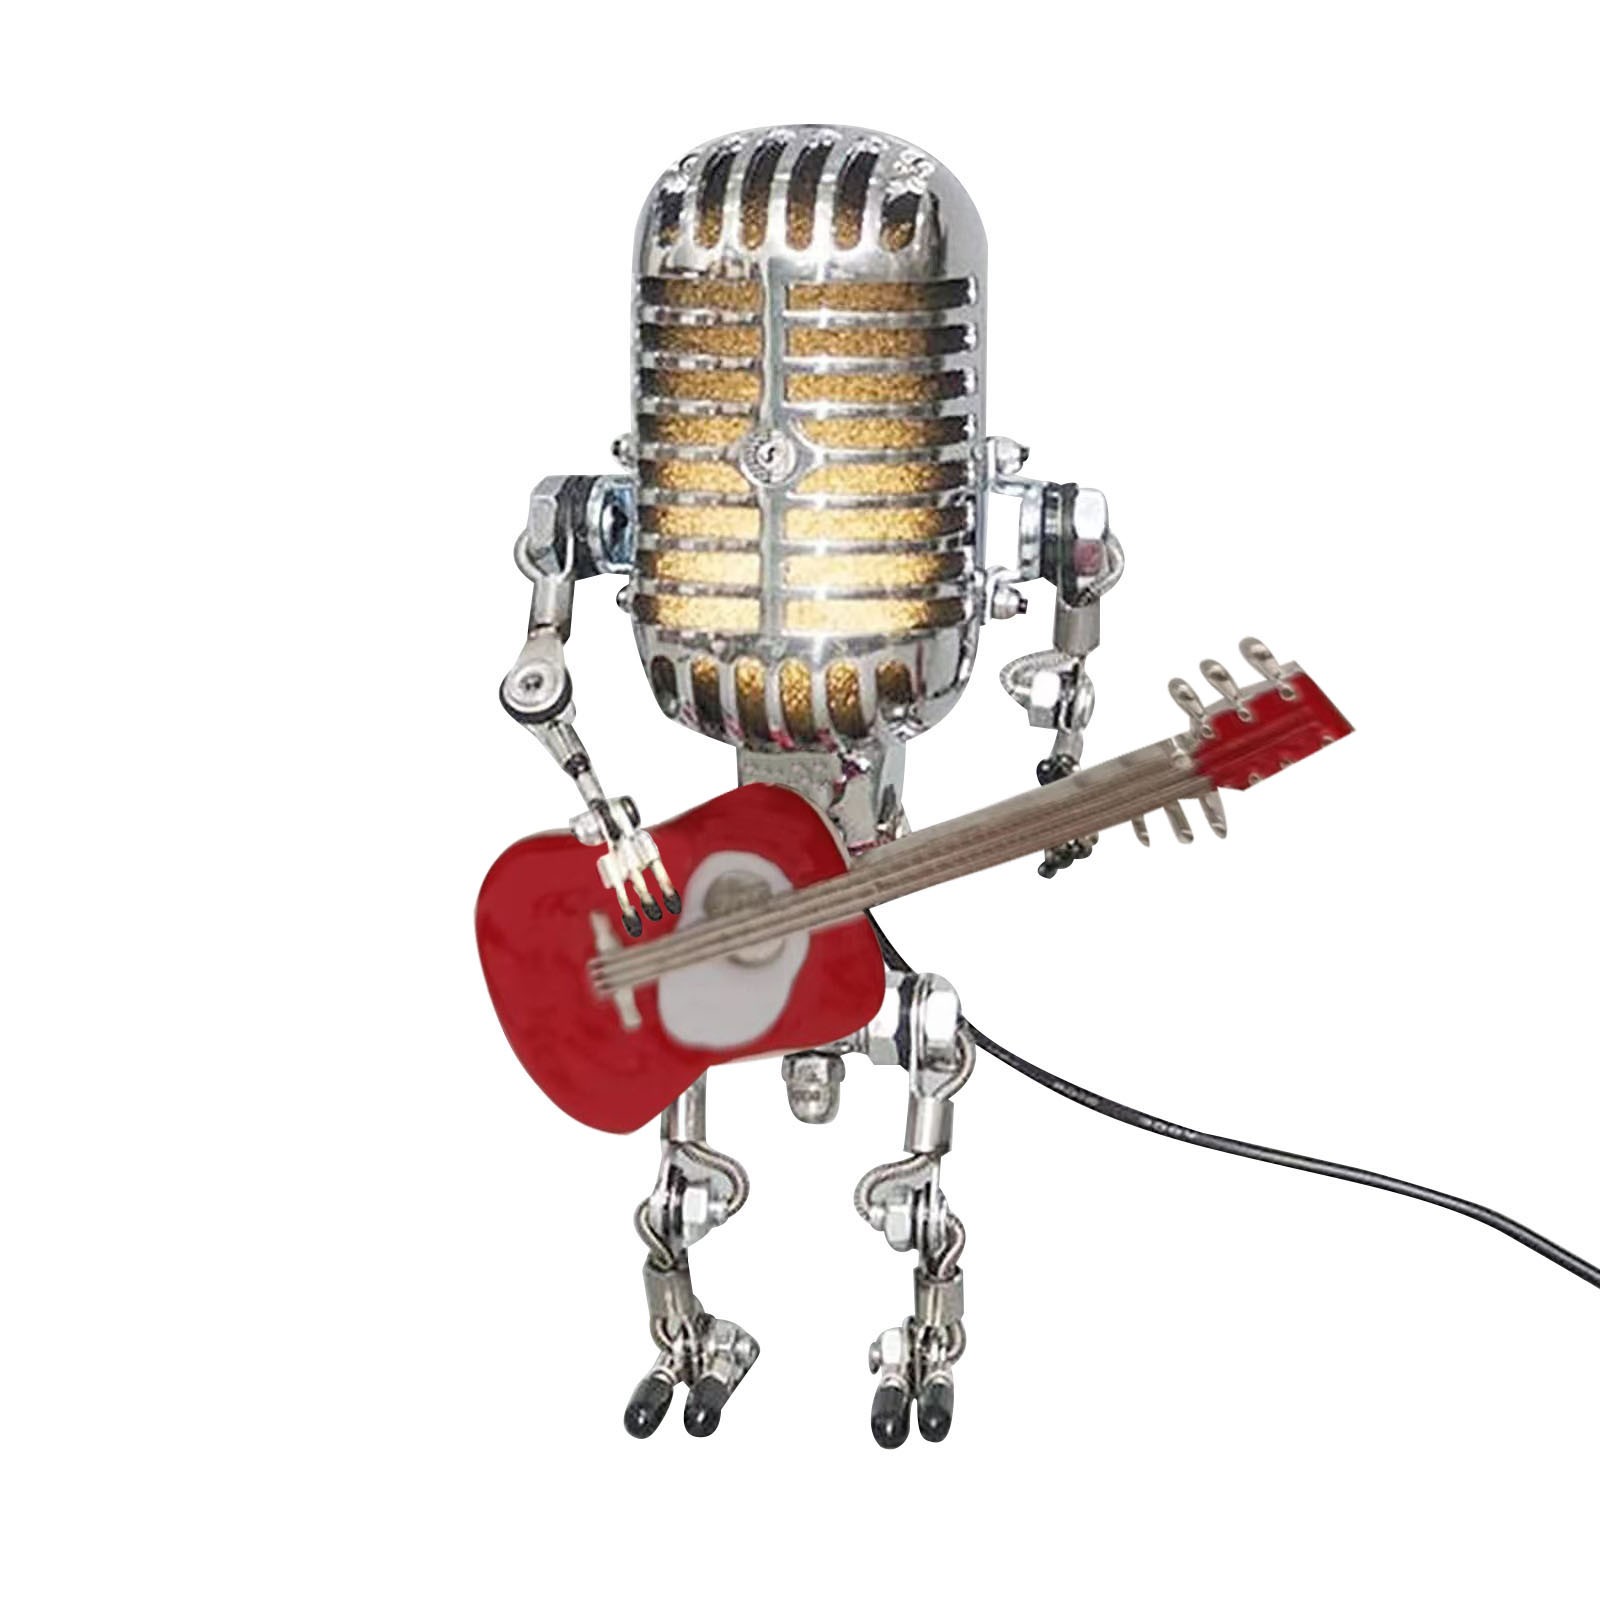 SDJMa Desk Lamp,Handmade Vintage Microphone Guitar Robot Table Lamp LED Bulbs Wall Lamp Home Desktop Decoration - Height 8.5 inch,Width 4 inch and Depth 3 inch - image 3 of 8